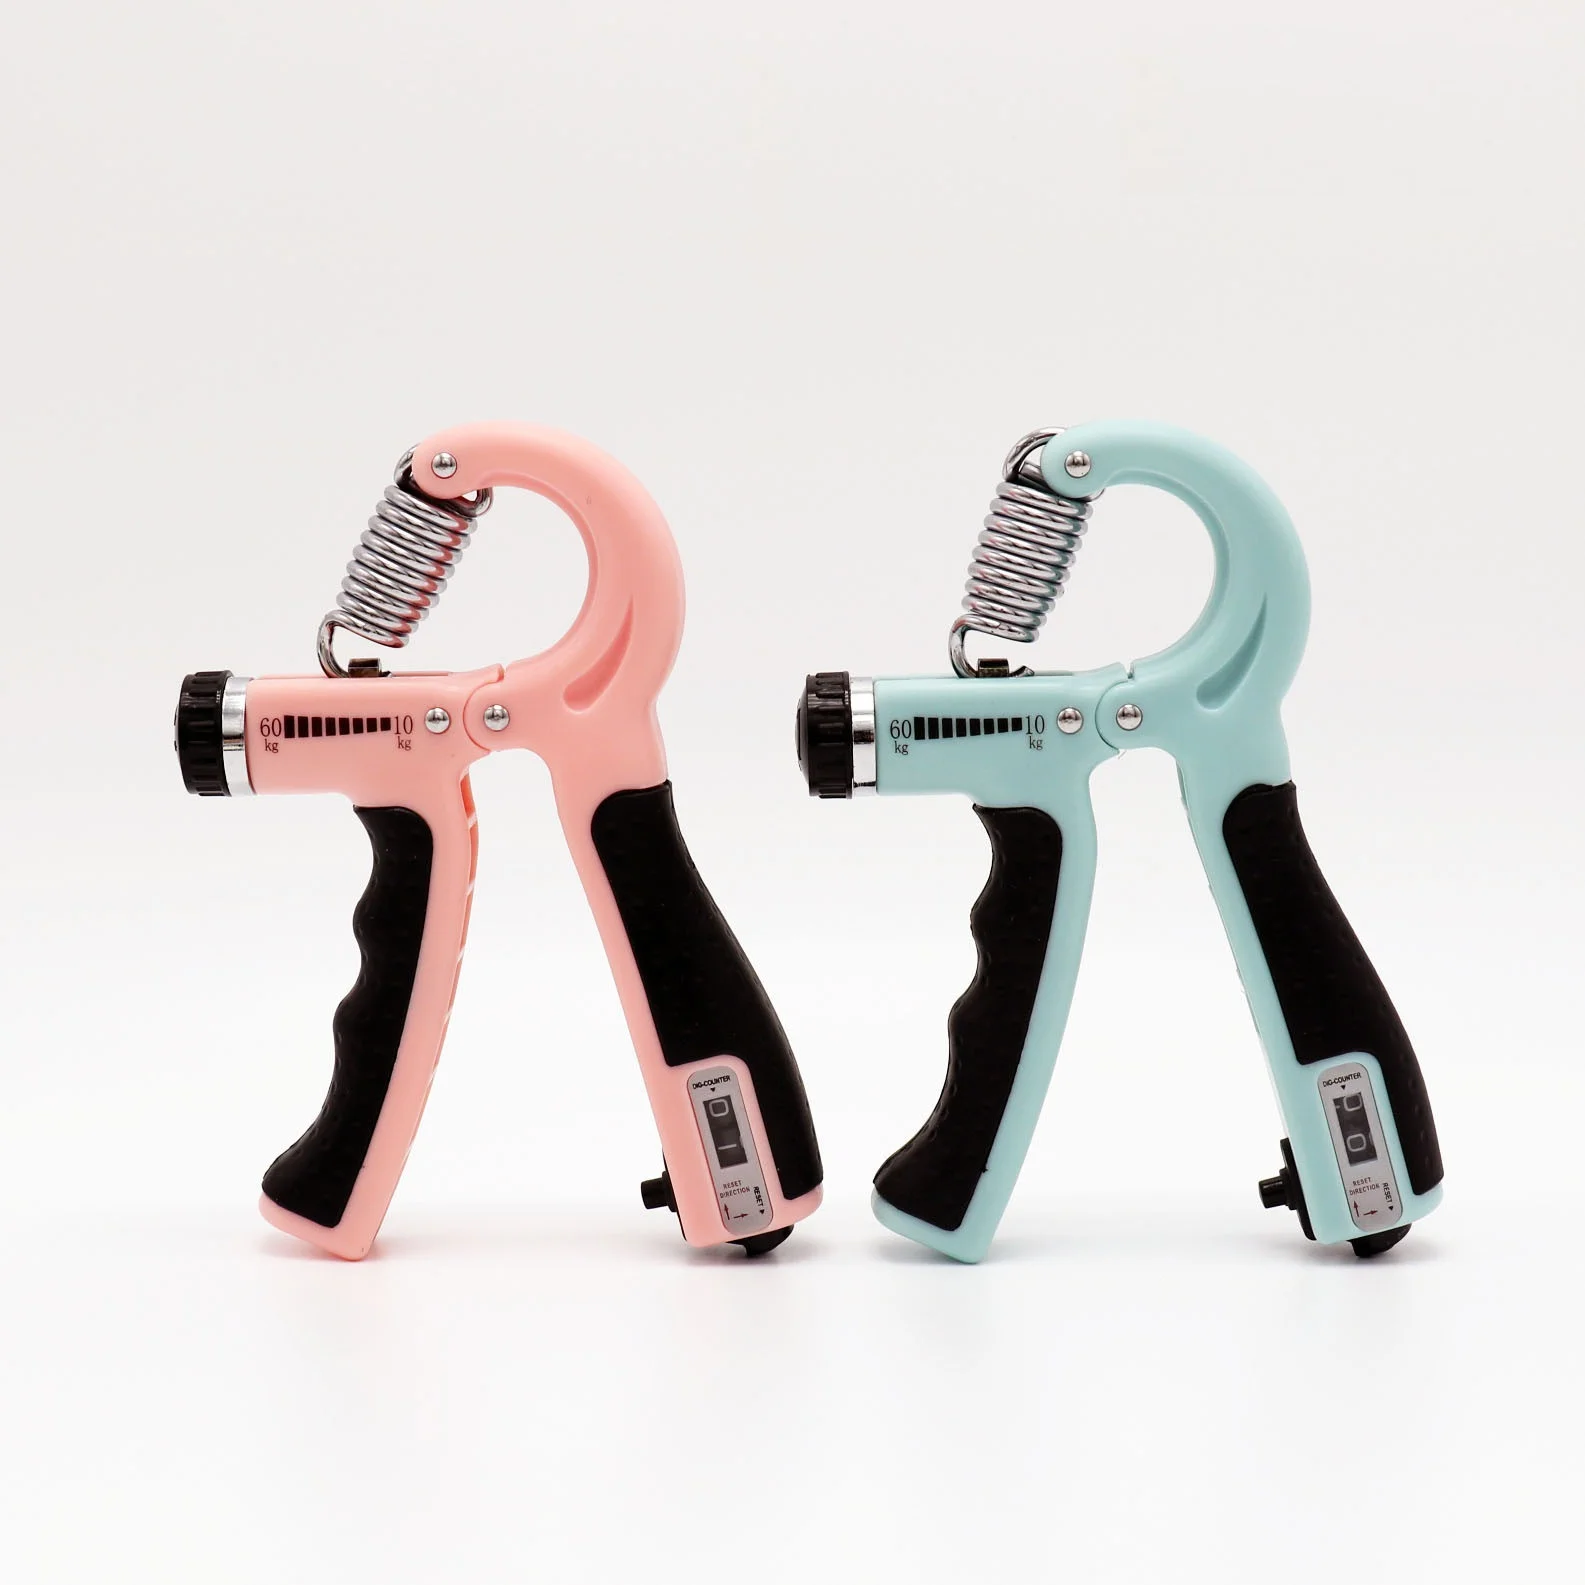 2021 Hot Sale Digital Count Hand Grips Adjustable Hand Grip Strengthener Home Exercise Fitness GYM Equipment